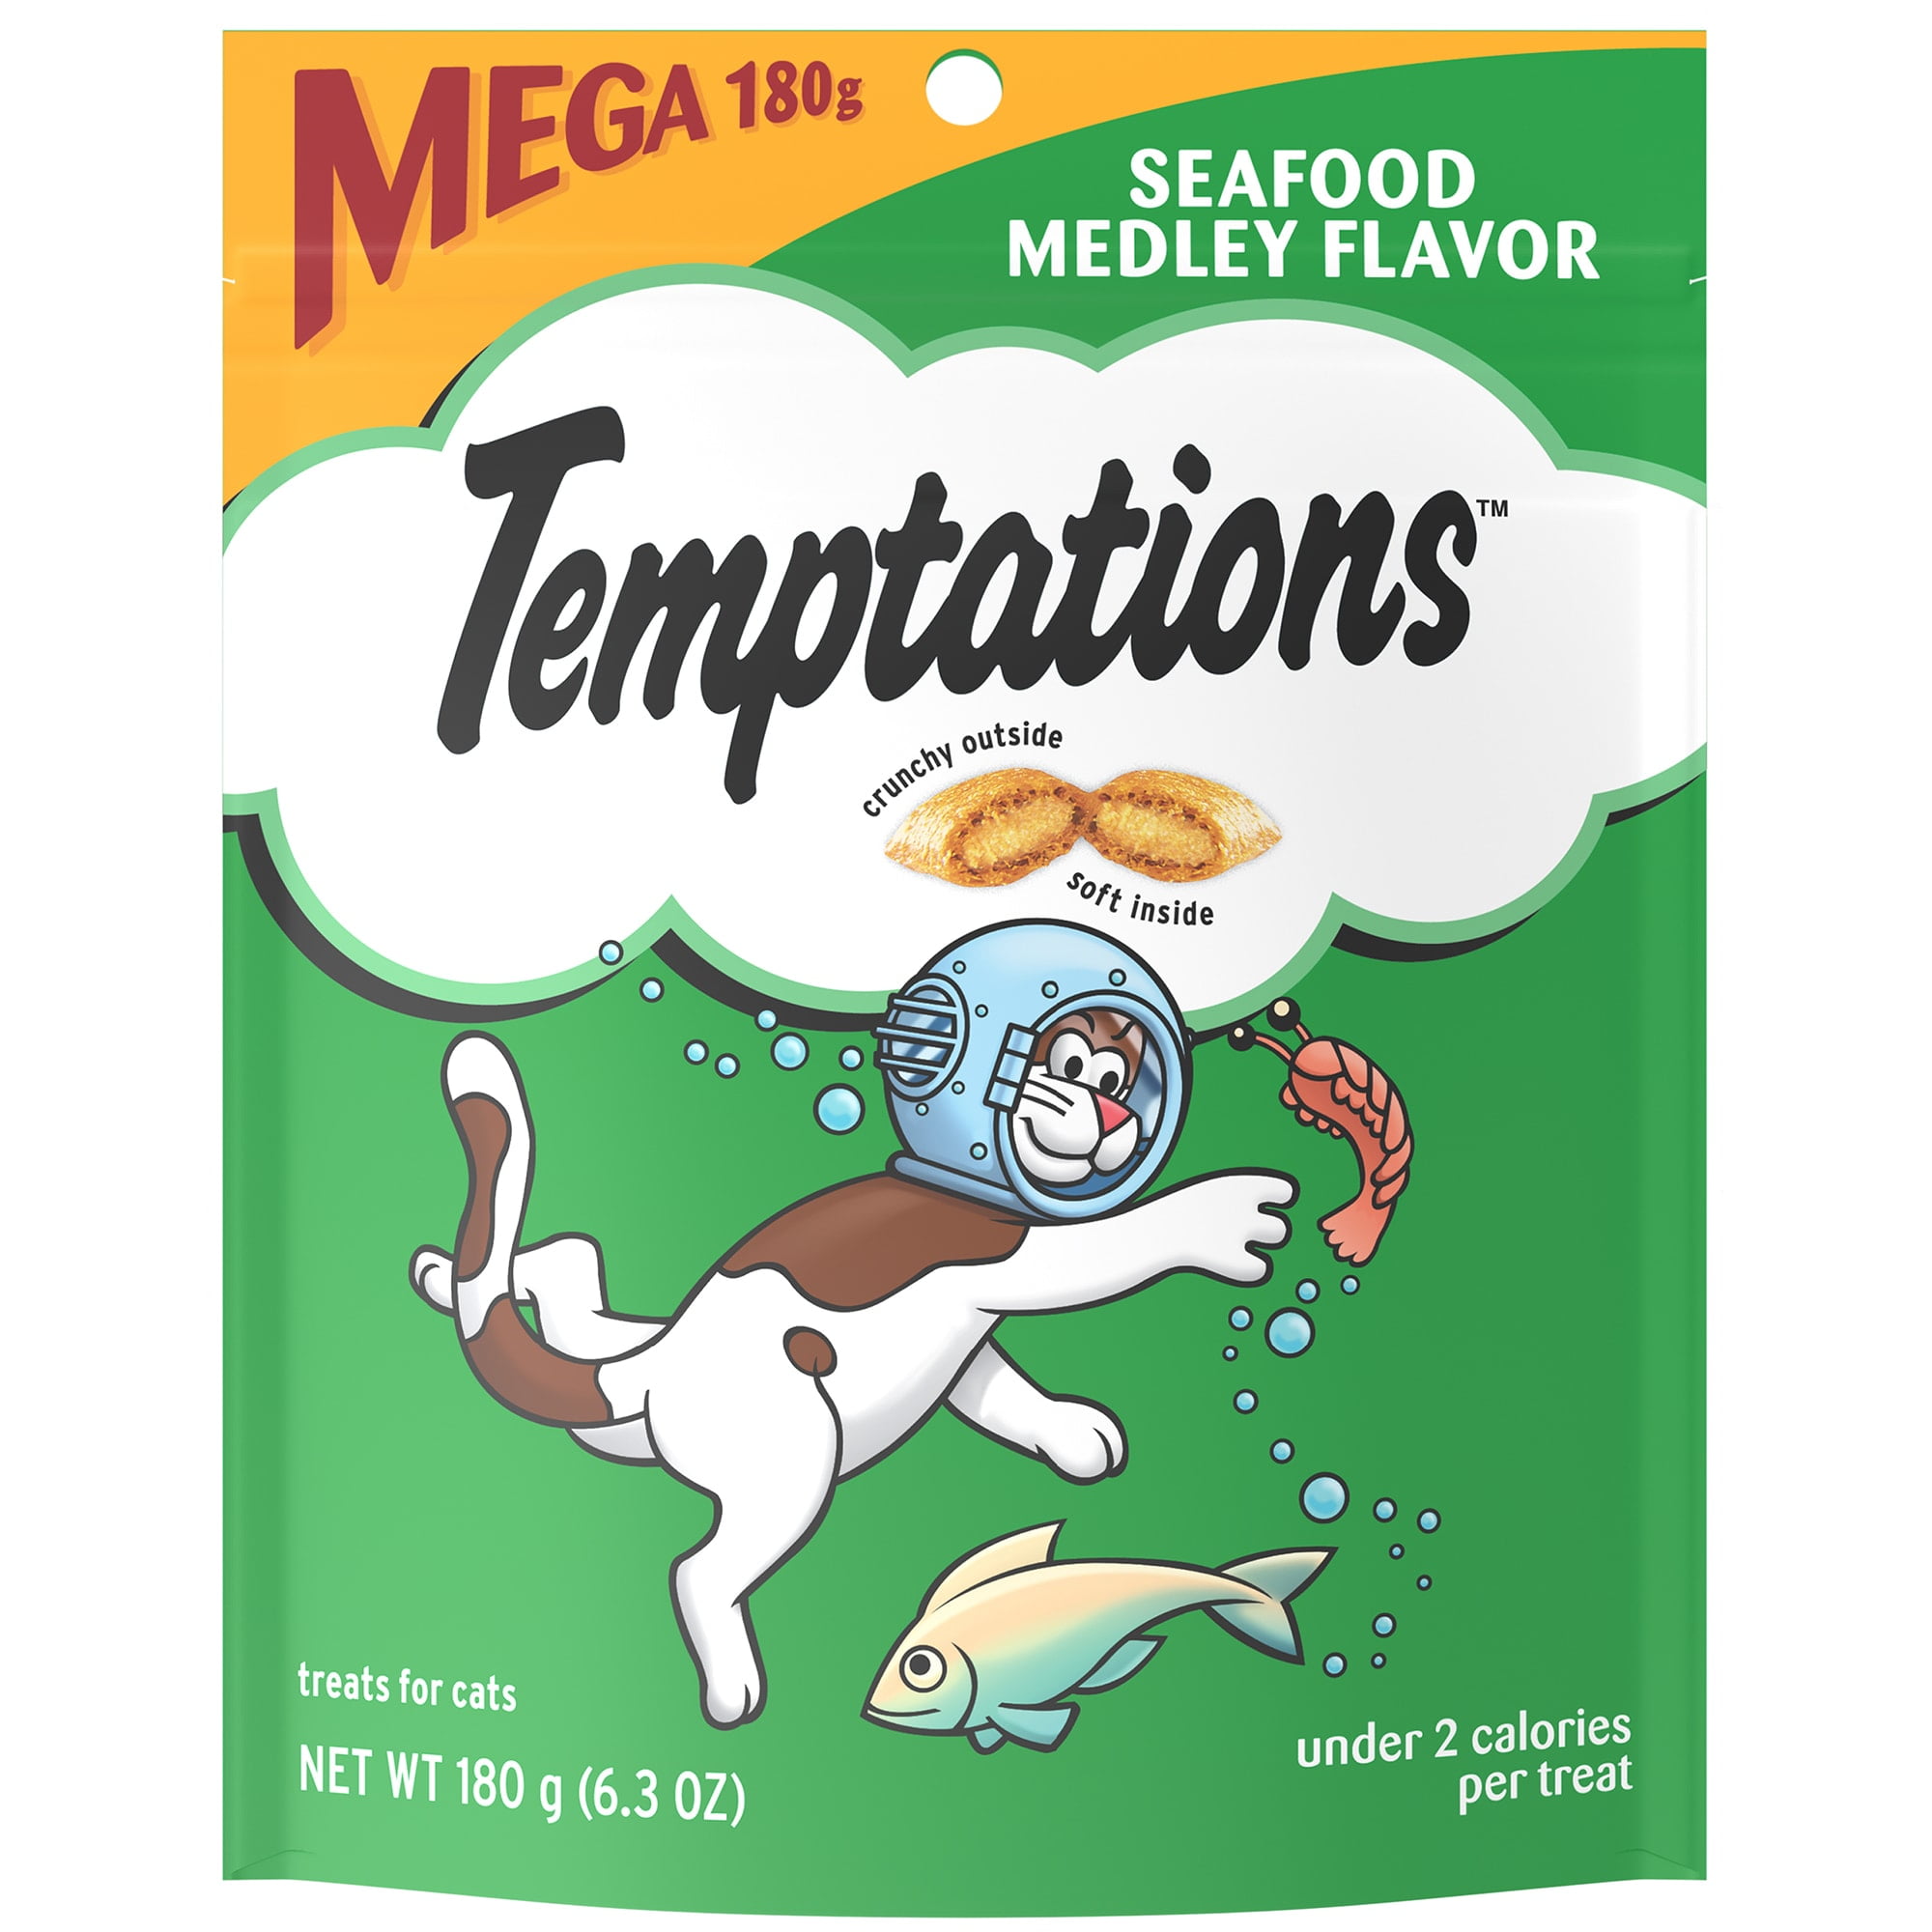 TEMPTATIONS Classic Crunchy and Soft Cat Treats Seafood Medley Flavor, 6.3 oz. Pouch